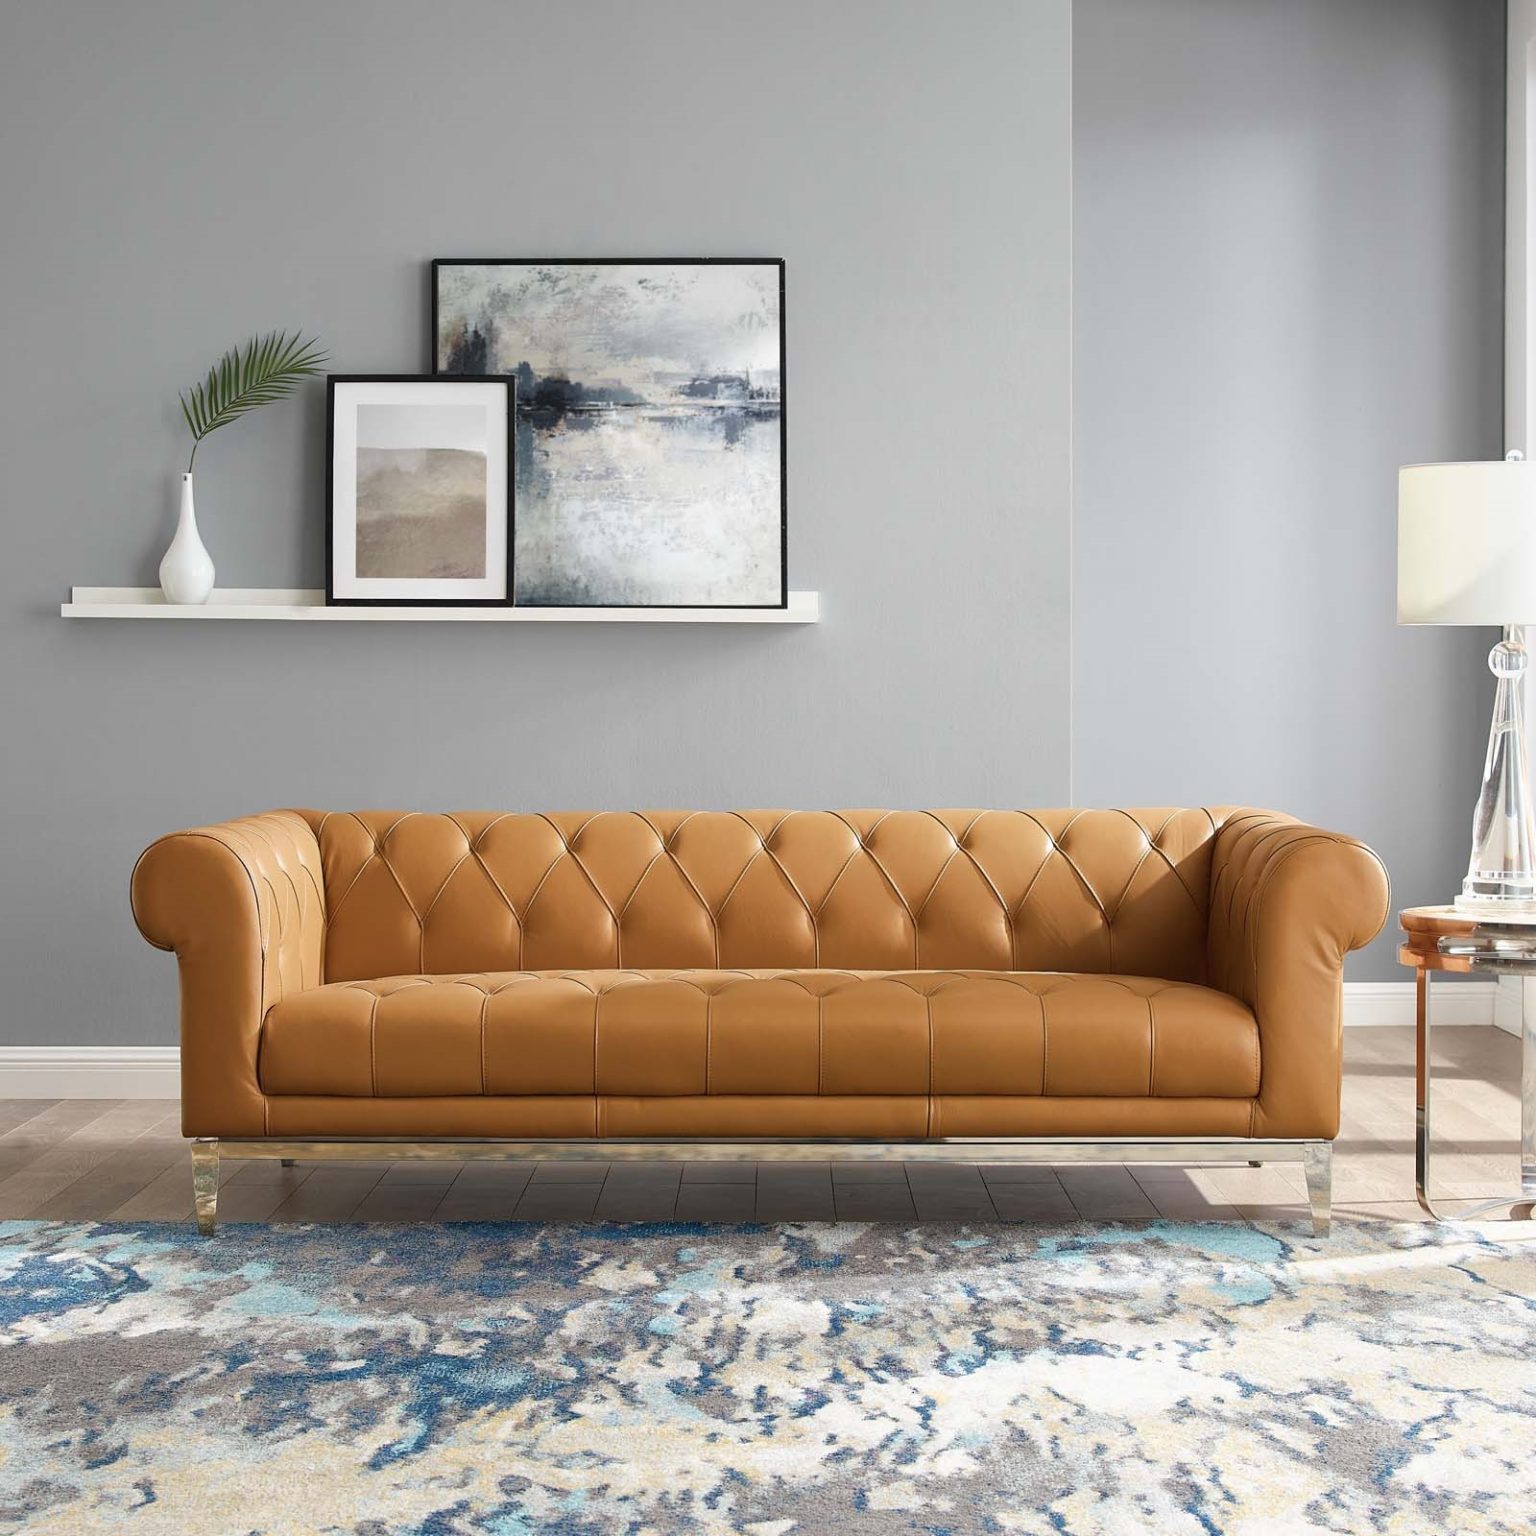 Idyll Tufted Button Upholstered Leather Chesterfield Sofa In Tan 5f08cc6d5dd0b 1536x1536 